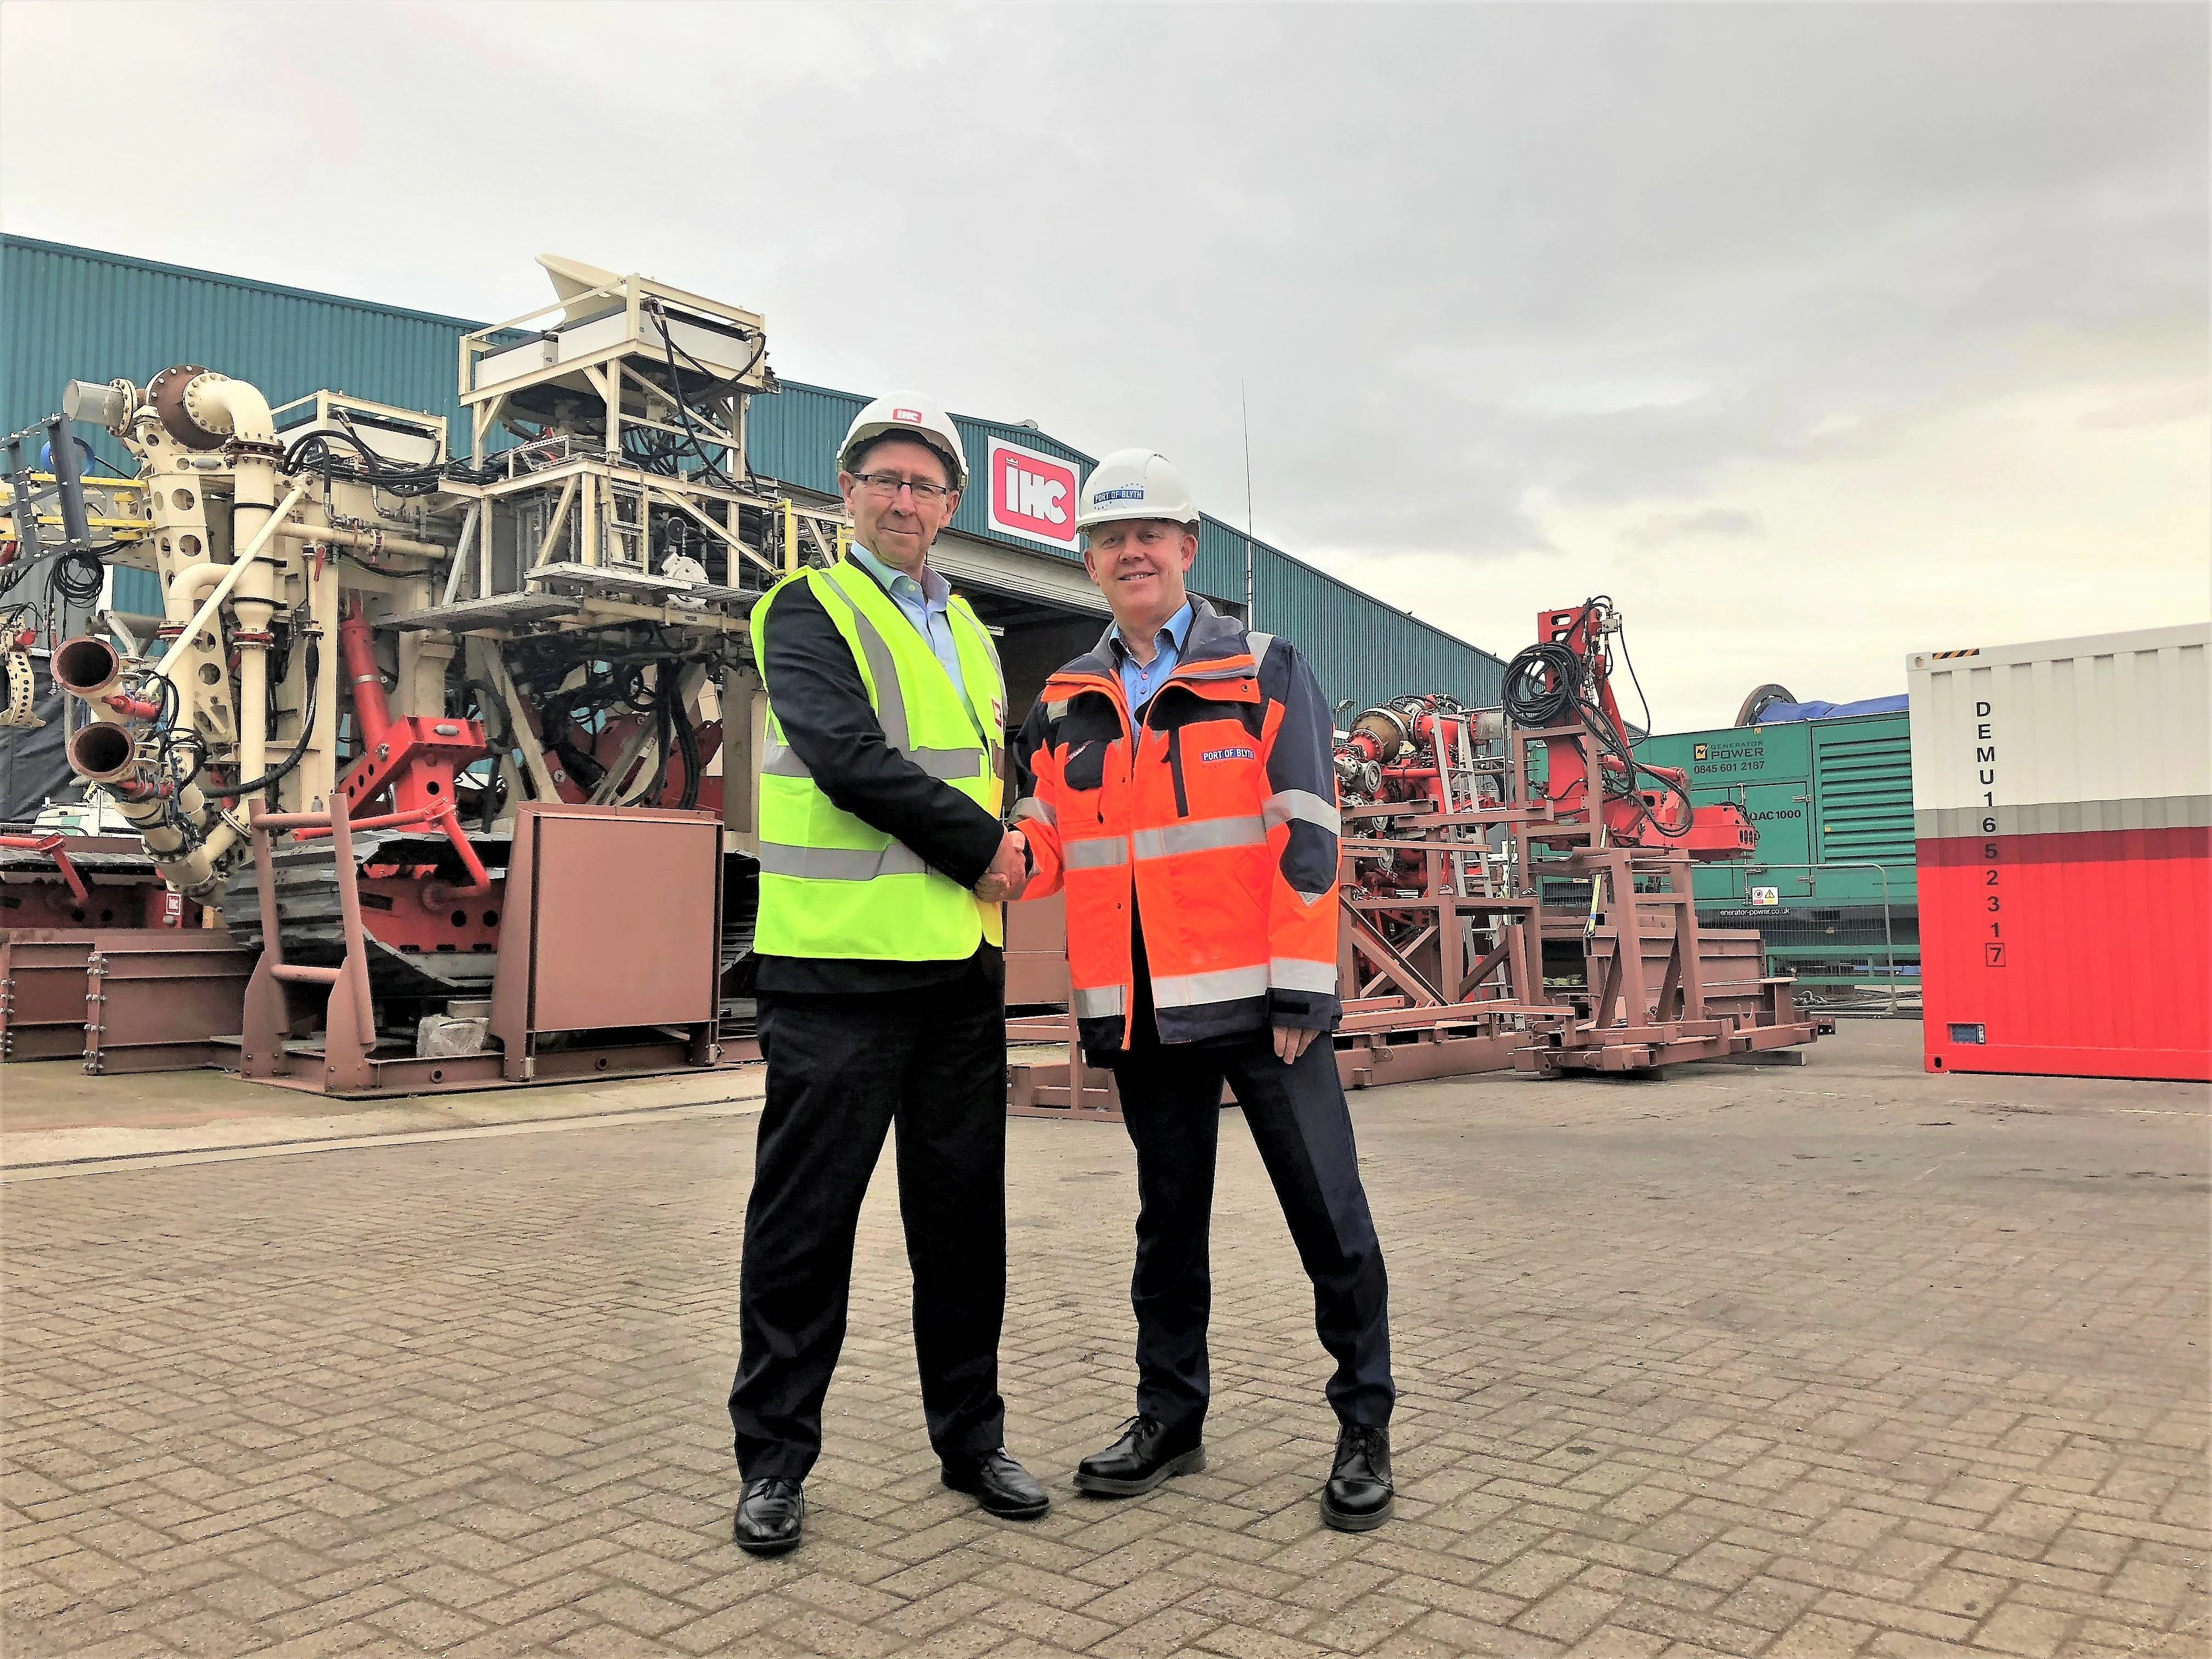 Royal IHC MD Paul Hardisty (left) and port chief exec Martin Lawlor